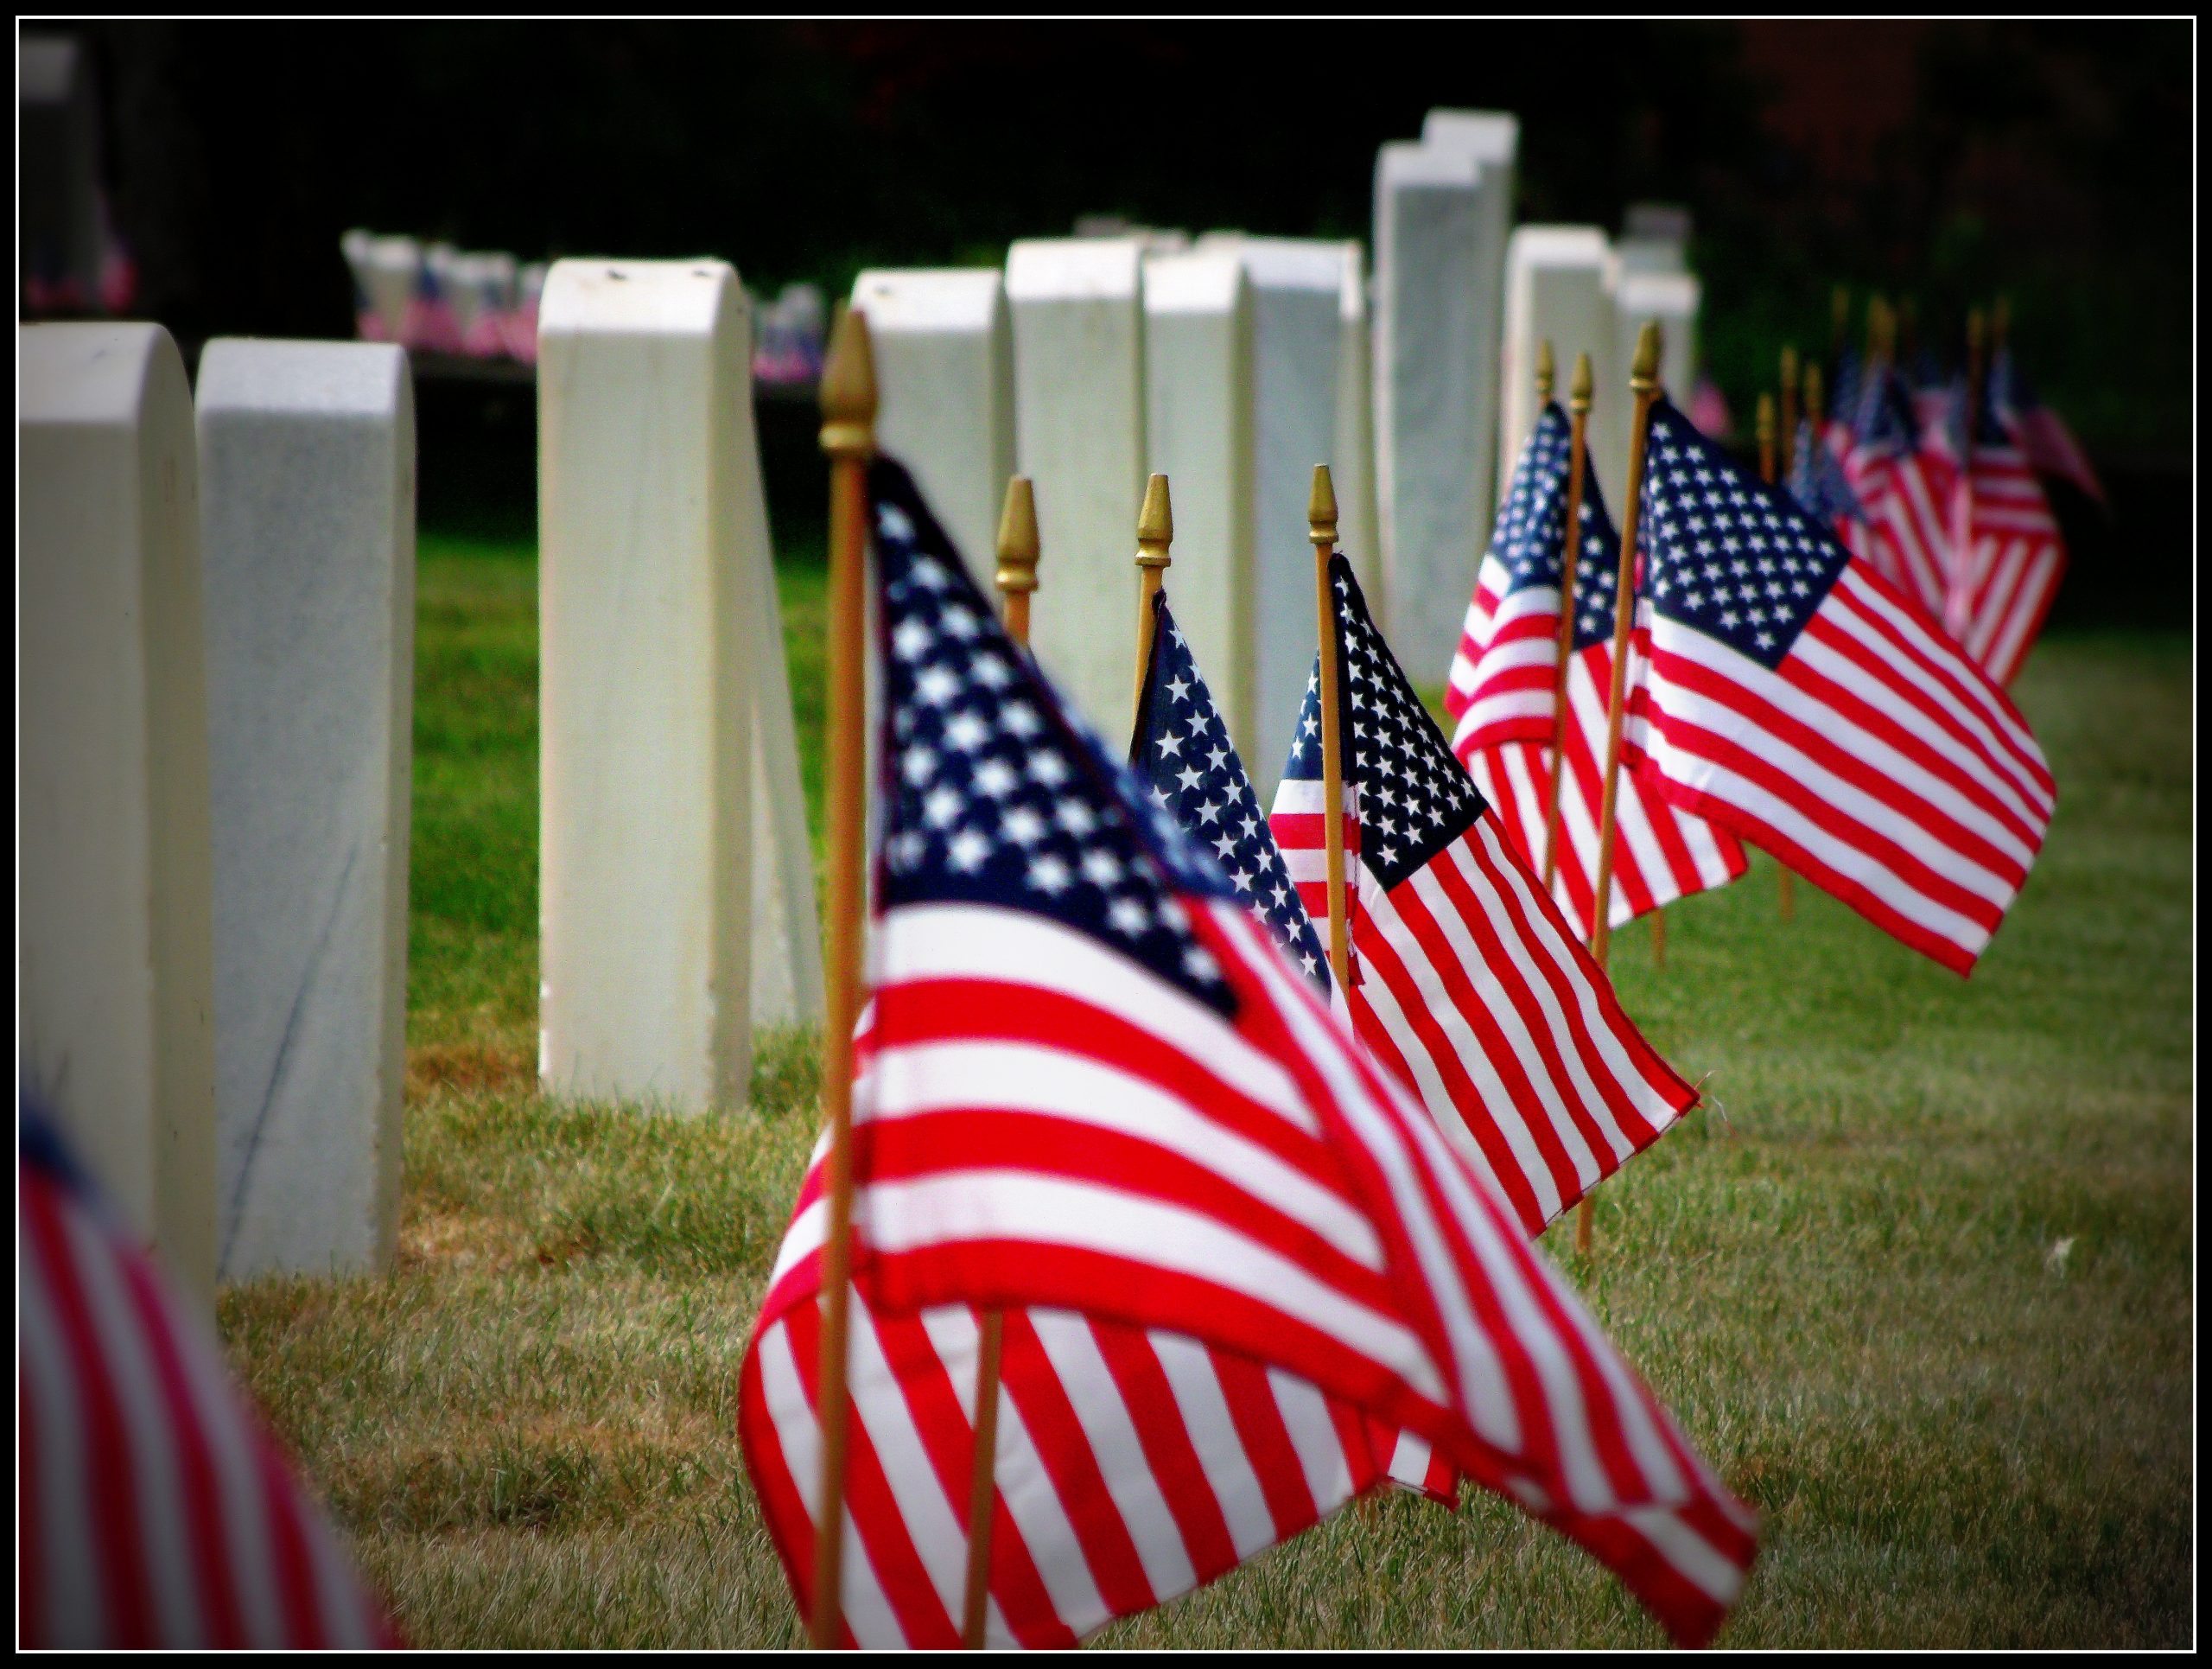 Volunteers Needed to Place Flags on Veteran’s Graves in Ponca City